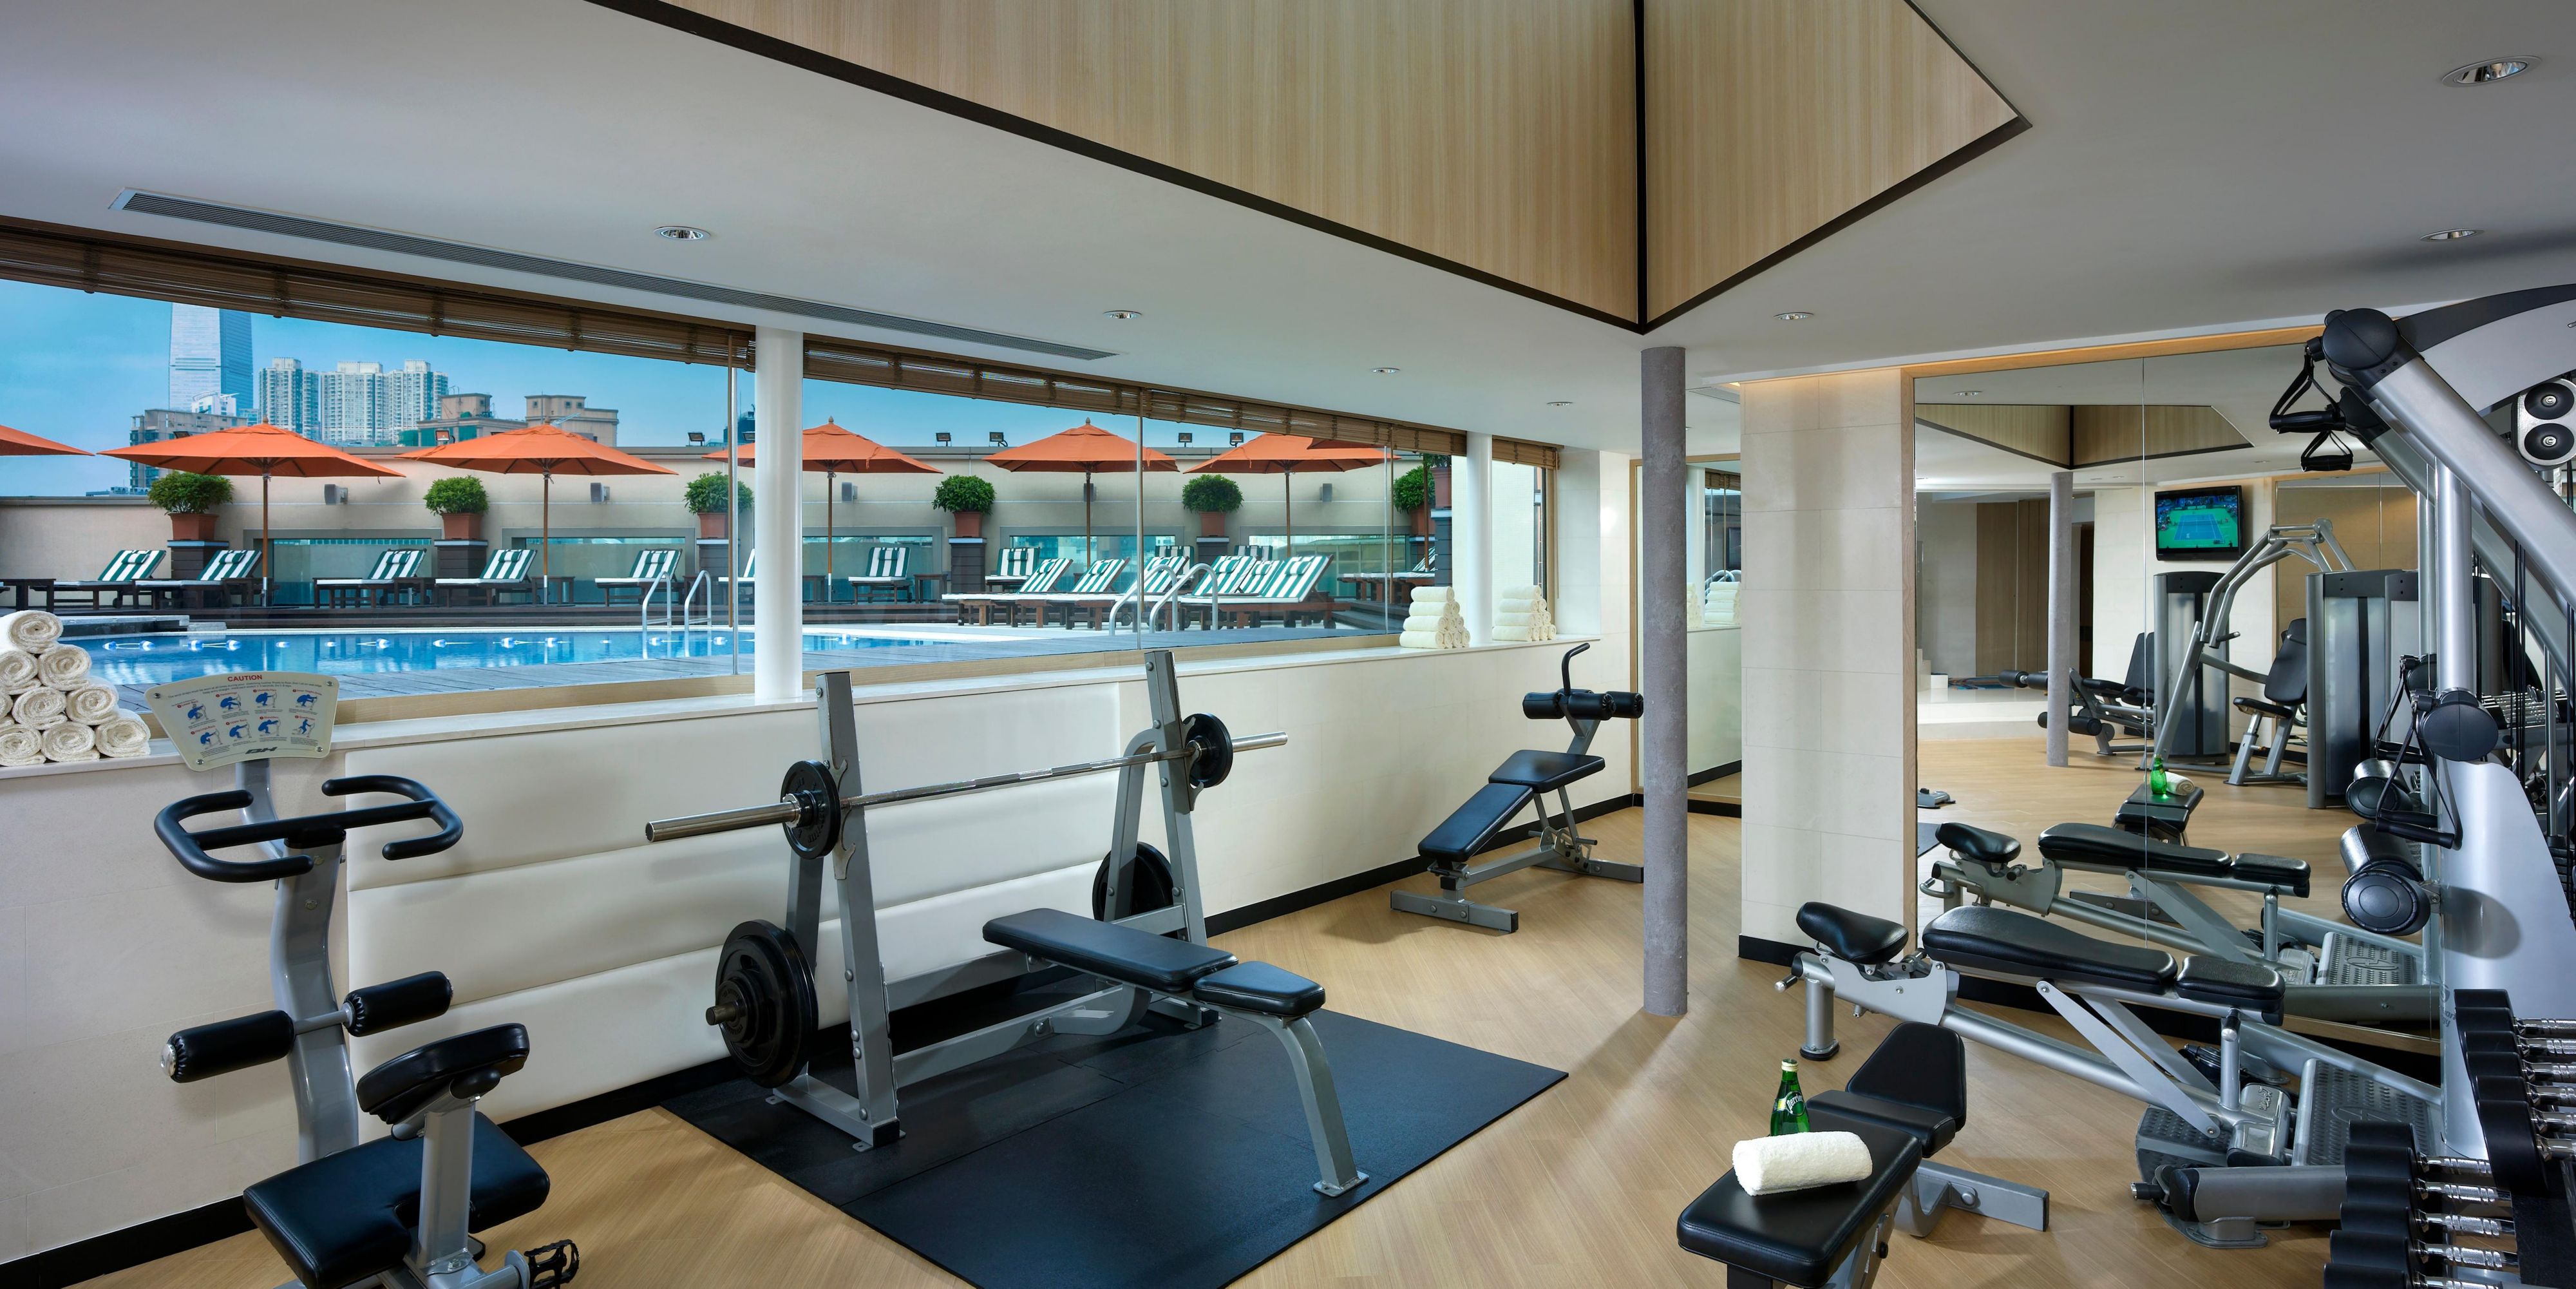 Located on the 18th floor, the 24-hour fitness studio features the latest selection of “Life Fitness” equipment for free weights, toning, cardiovascular, stretching and conditioning exercises. Personal training sessions are available. Towels, bathrobes and body wash and care products are complimentary.